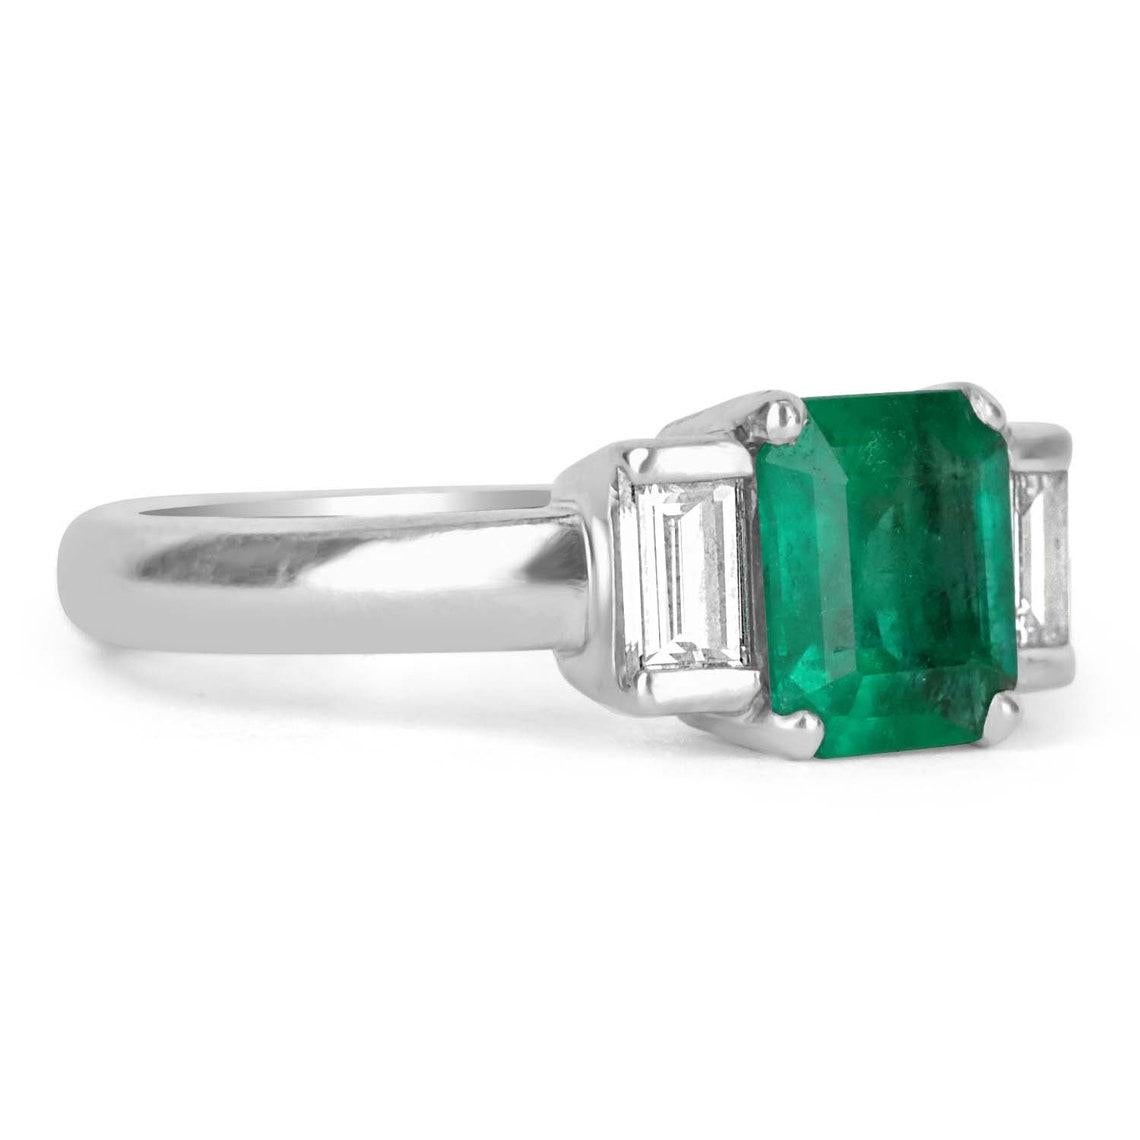 Setting: Three-Stone
Metal Purity: Platinum
Metal Weight: 7.4 Grams

Main Stone: Emerald
Shape: Emerald Cut
Approx Weight: 1.18-Carats
Color: Green
Clarity: Transparent
Luster: Excellent-Very Good
Origin: Colombia
Treatment: Natural

Secondary